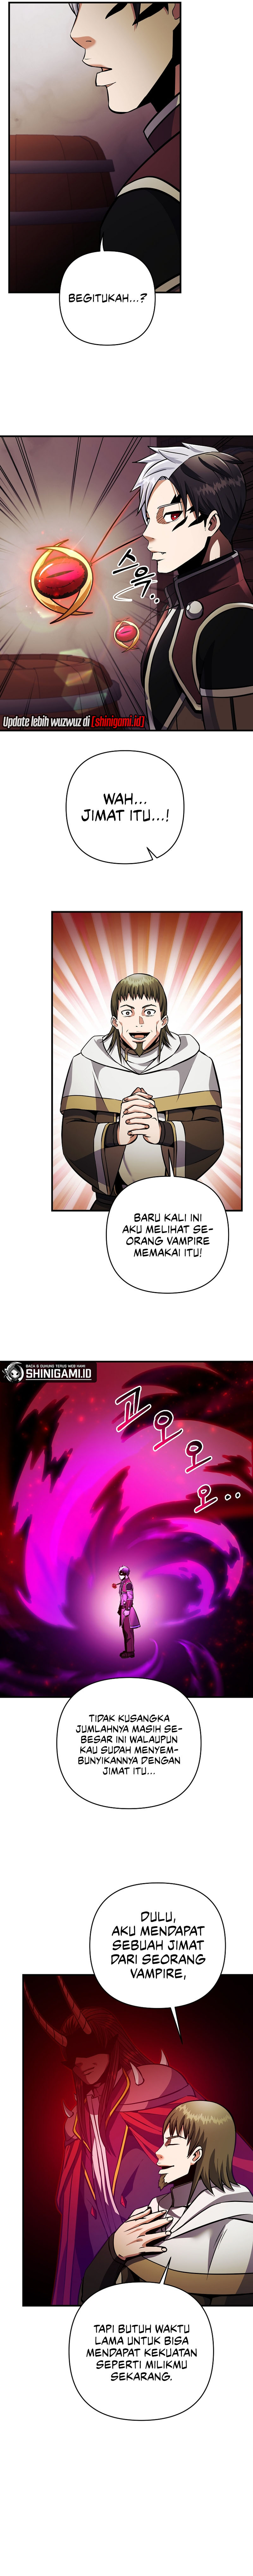 i-became-the-mad-emperor Chapter 31